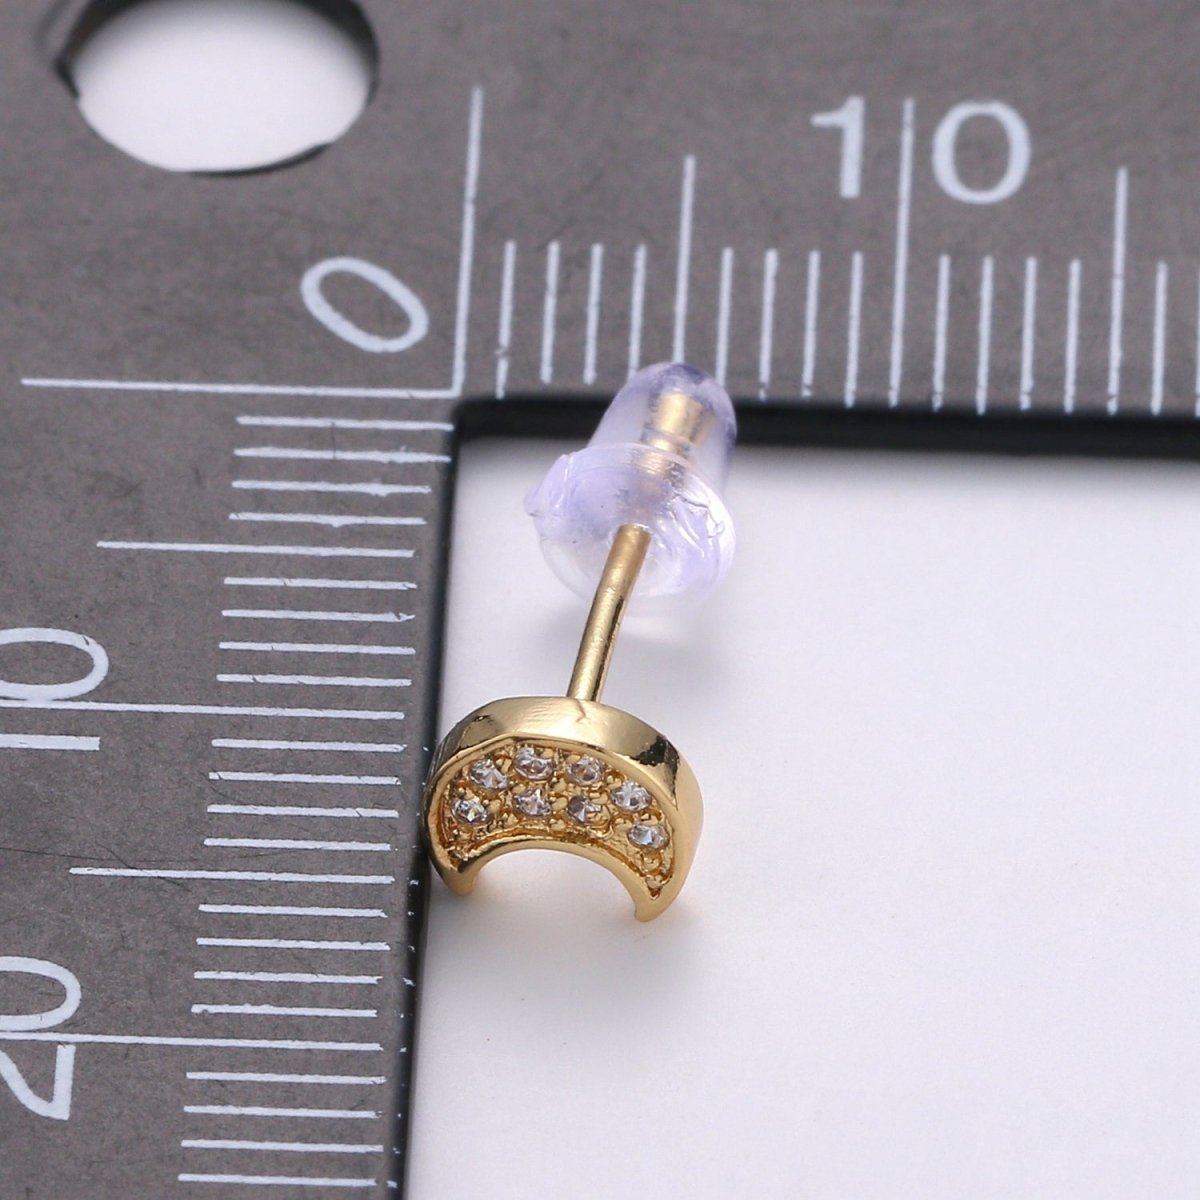 Moon Stud Earring Charm • 24k Gold Filled• Jewelry Making Supplies • Open Ring Attached for Jewelry Making Supply Q-293 - DLUXCA